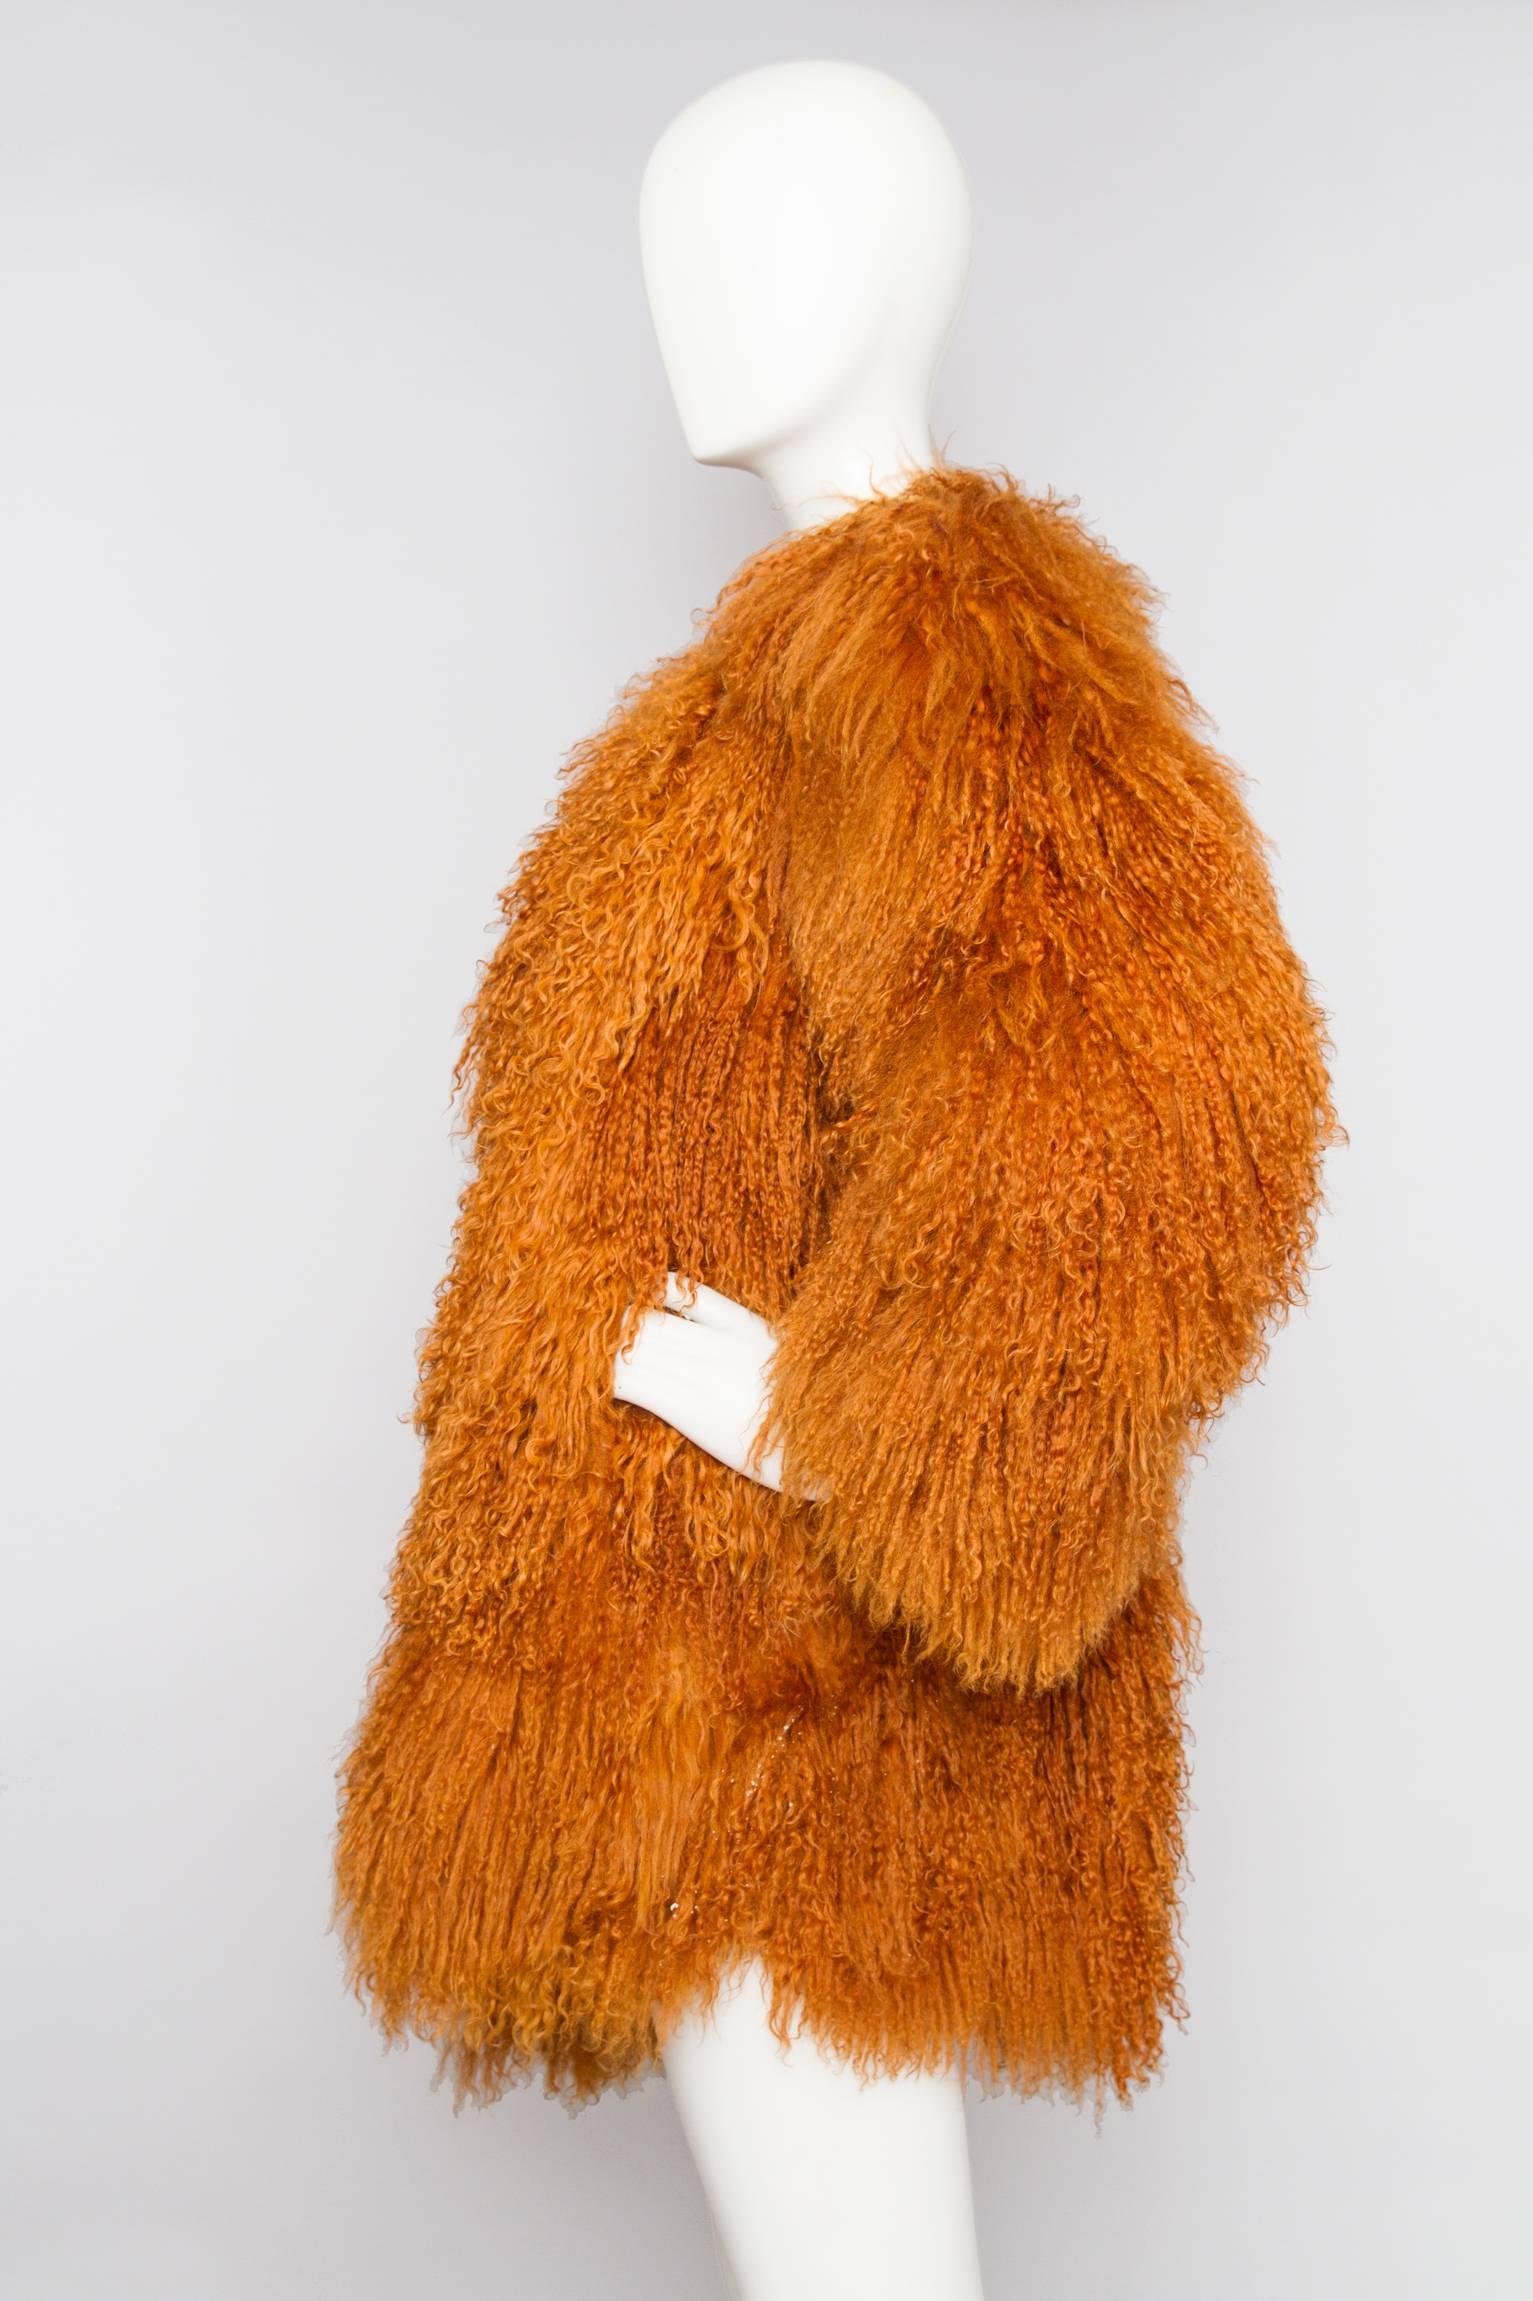 A stunning 1990s Yves Saint Laurent orange Mongolian lamb fur coat with a round neckline and a front hook button closure. The glamorous coat has exaggerated shoulders, side pockets and is fully lined in matching brown silk with jacquard YSL logo